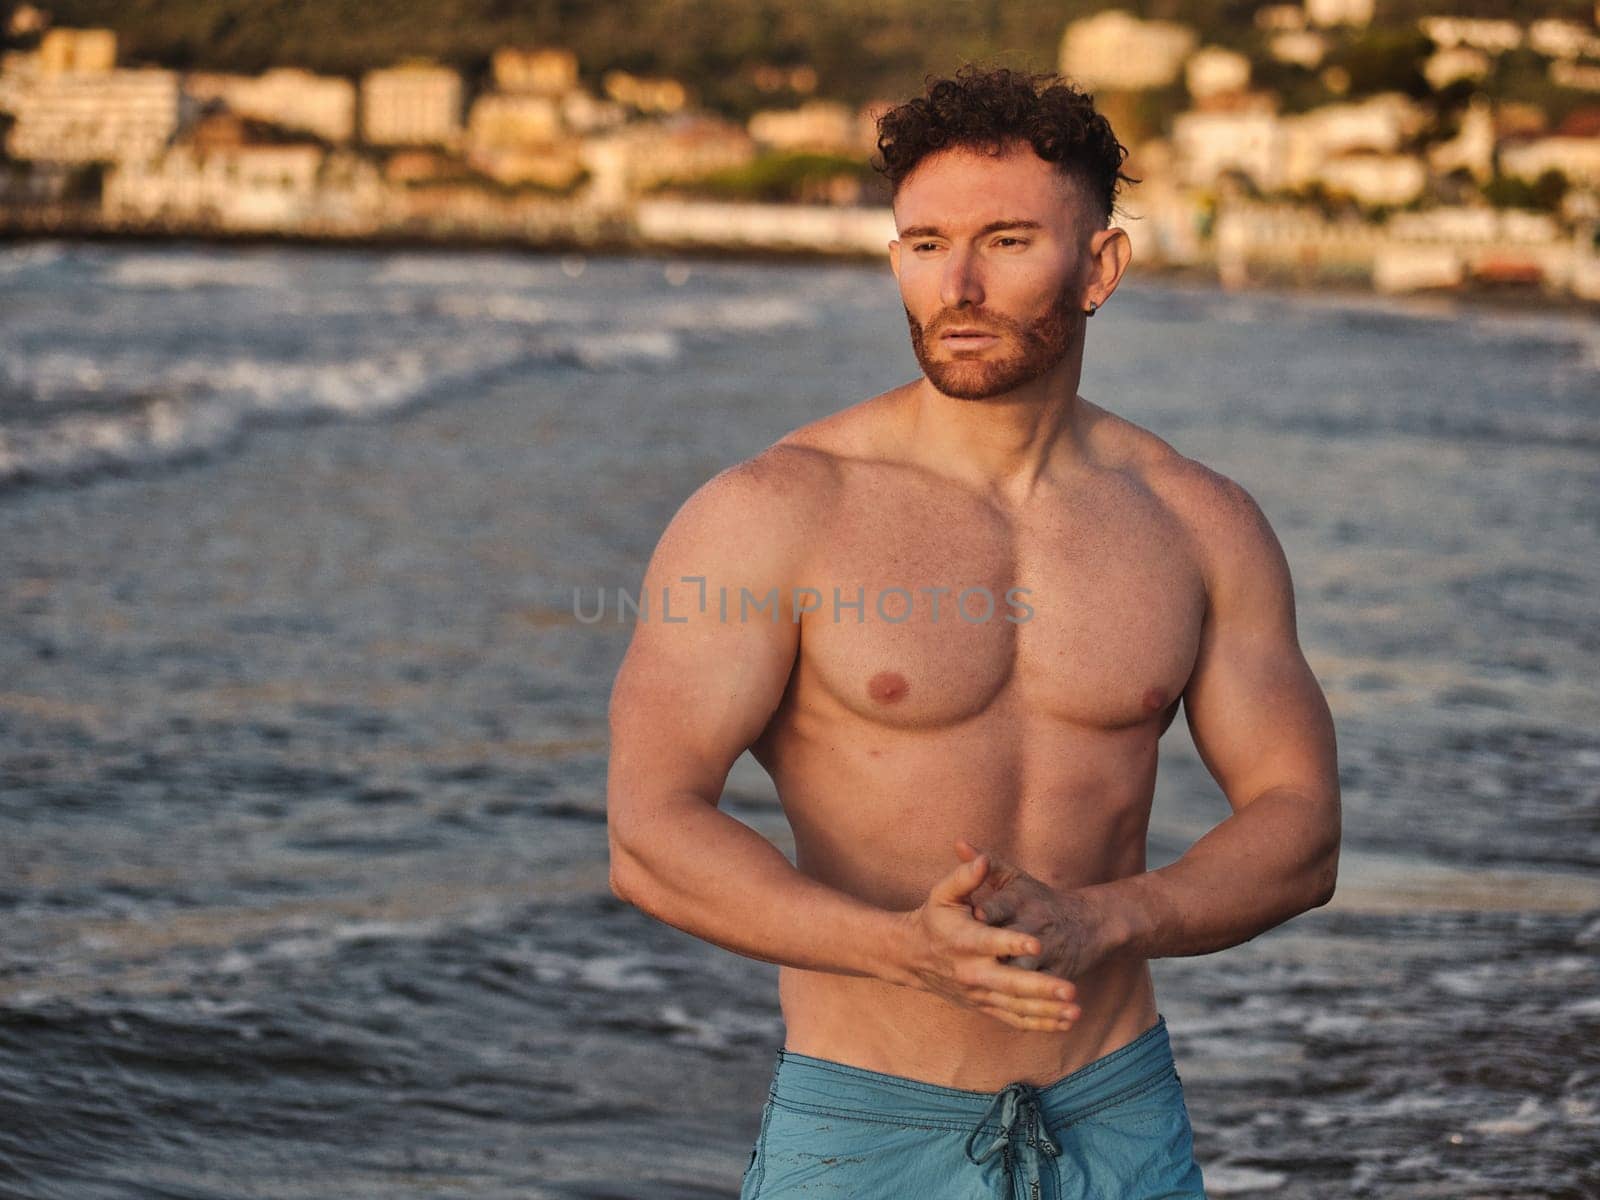 Muscular and fit young bodybuilder in the sea by artofphoto